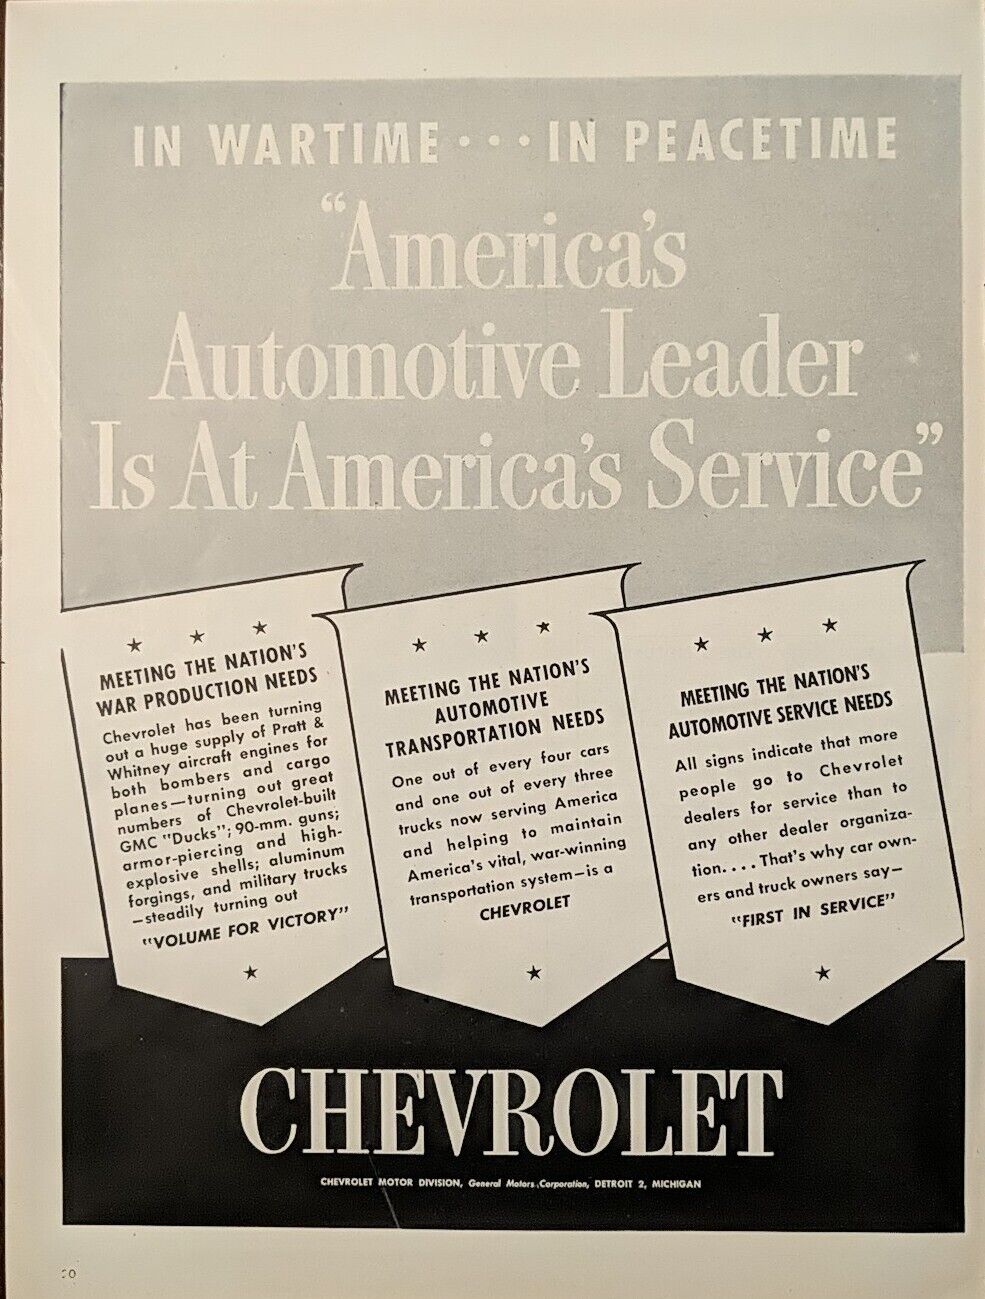 1942 Chevrolet Print Ad, Wartime Or Peacetime America's Service Leader